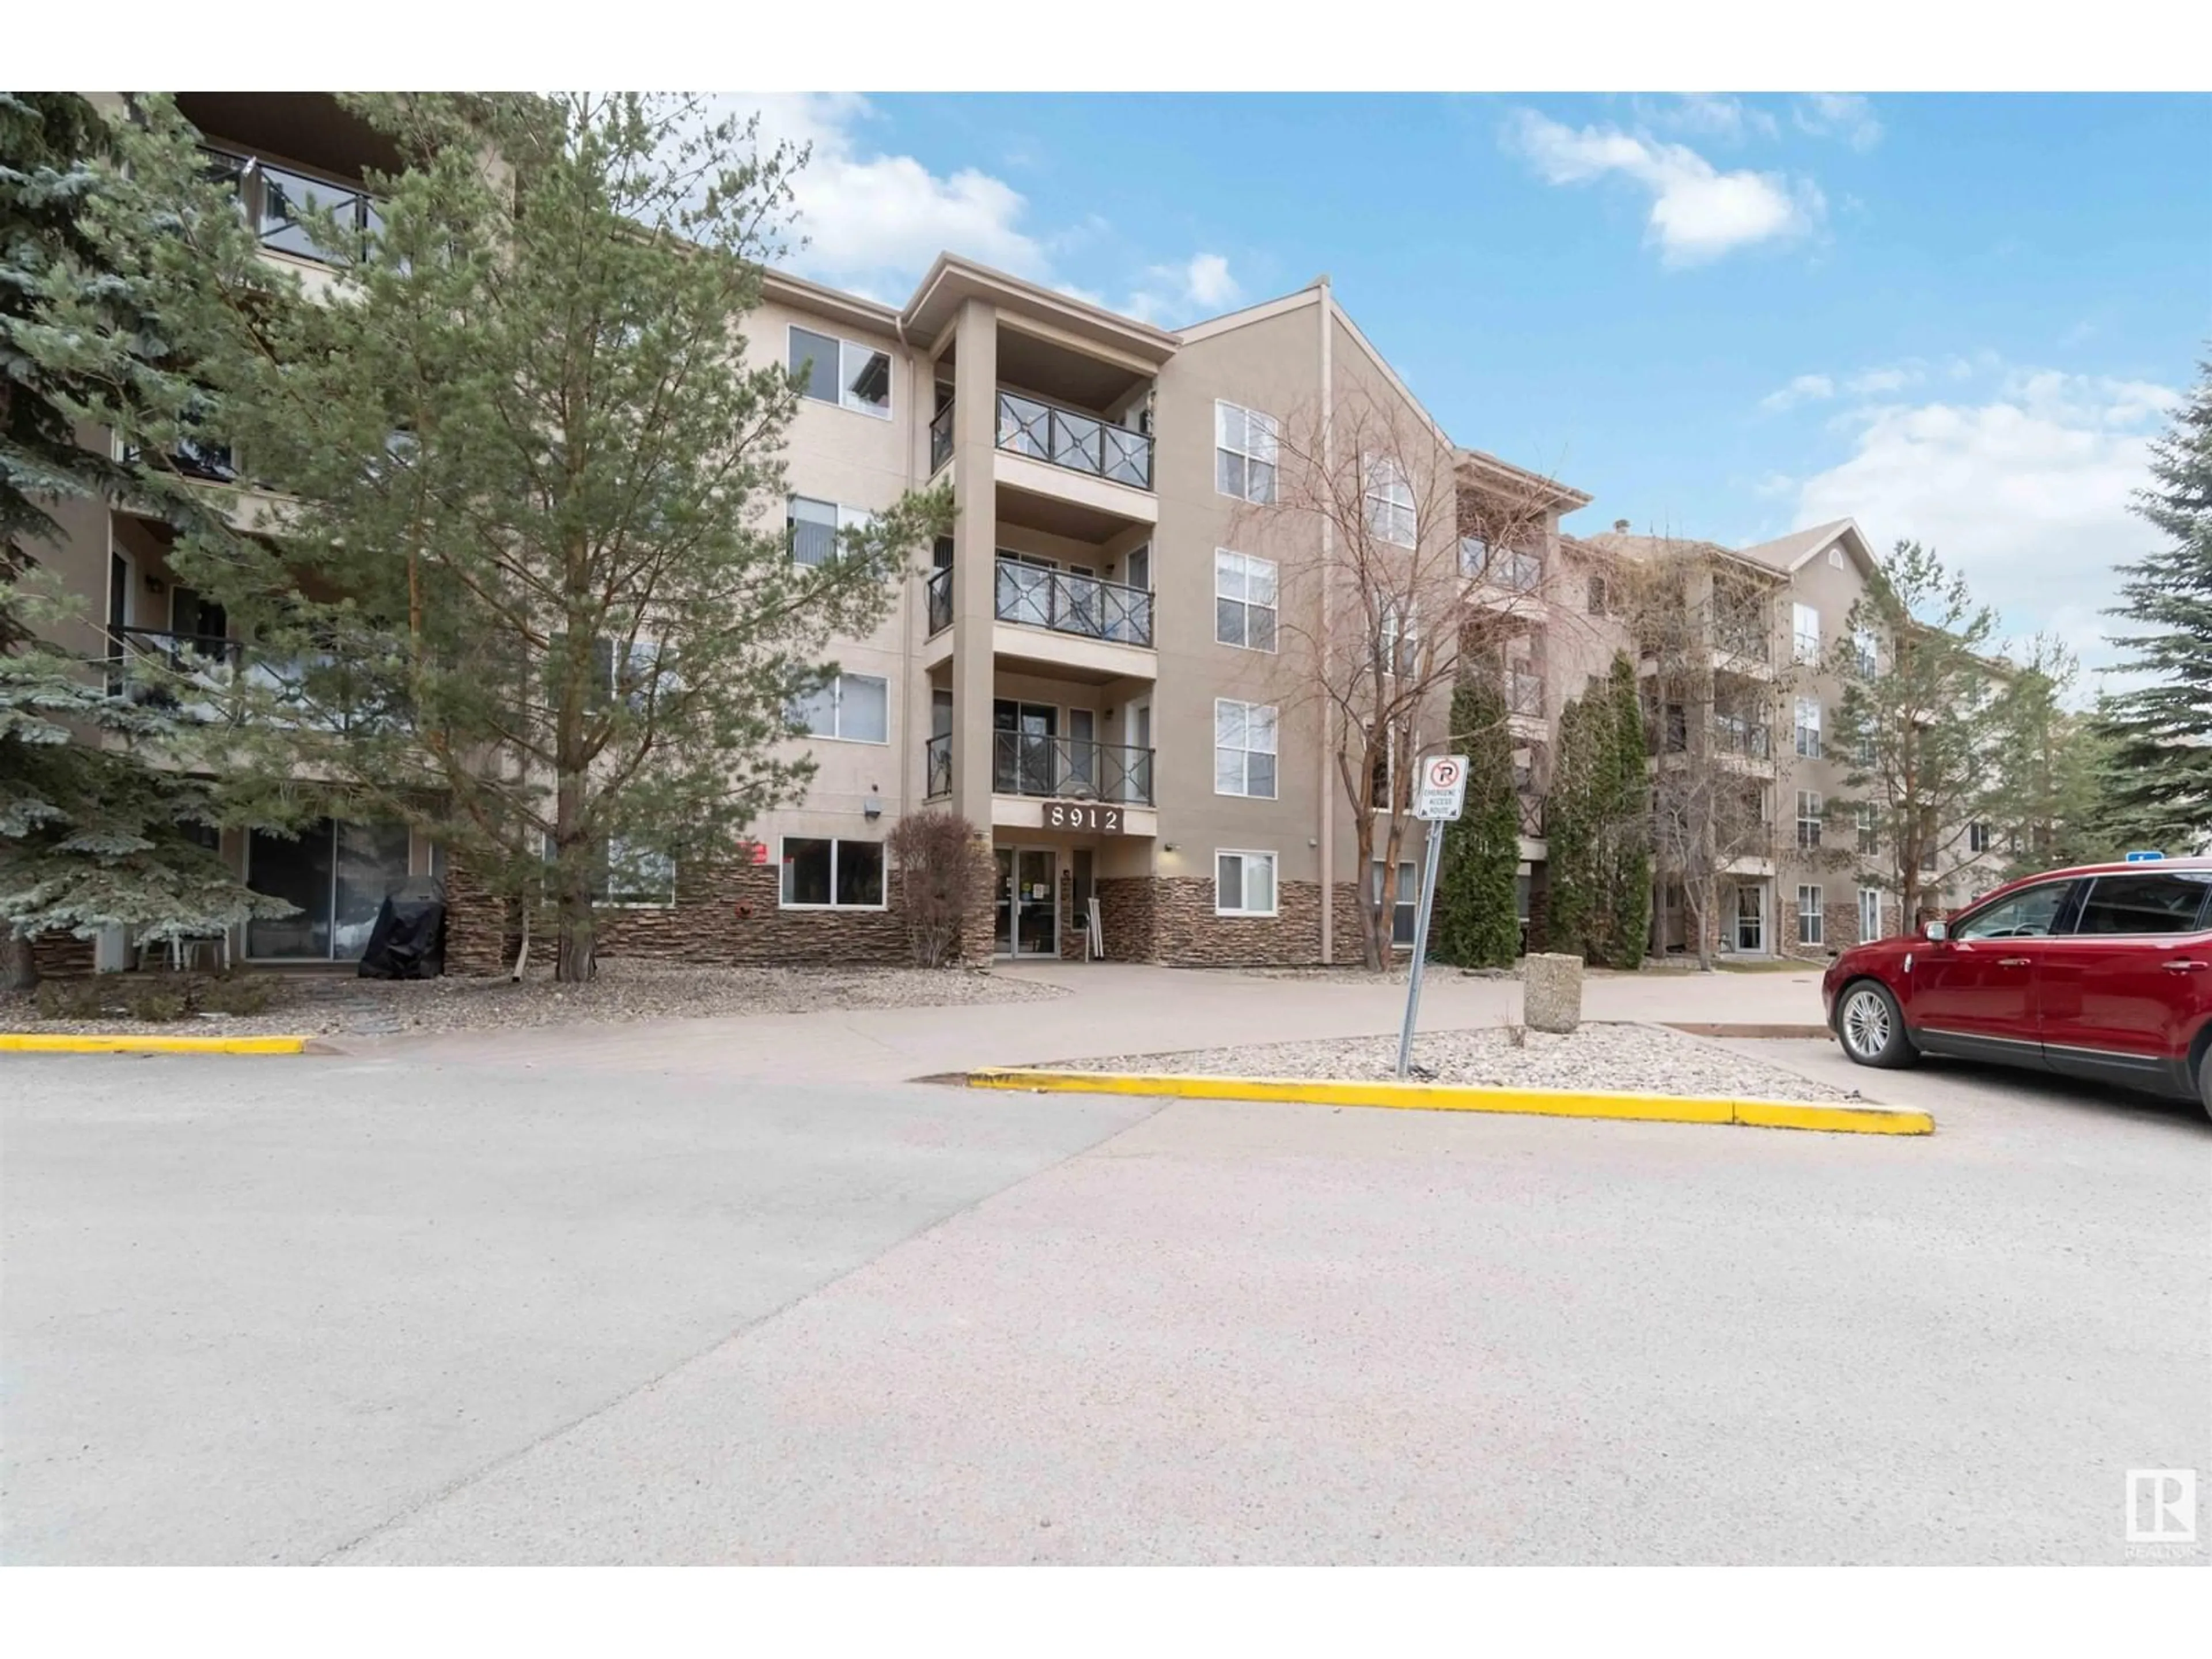 A pic from exterior of the house or condo for #410 8912 156 ST NW, Edmonton Alberta T5R1Y6